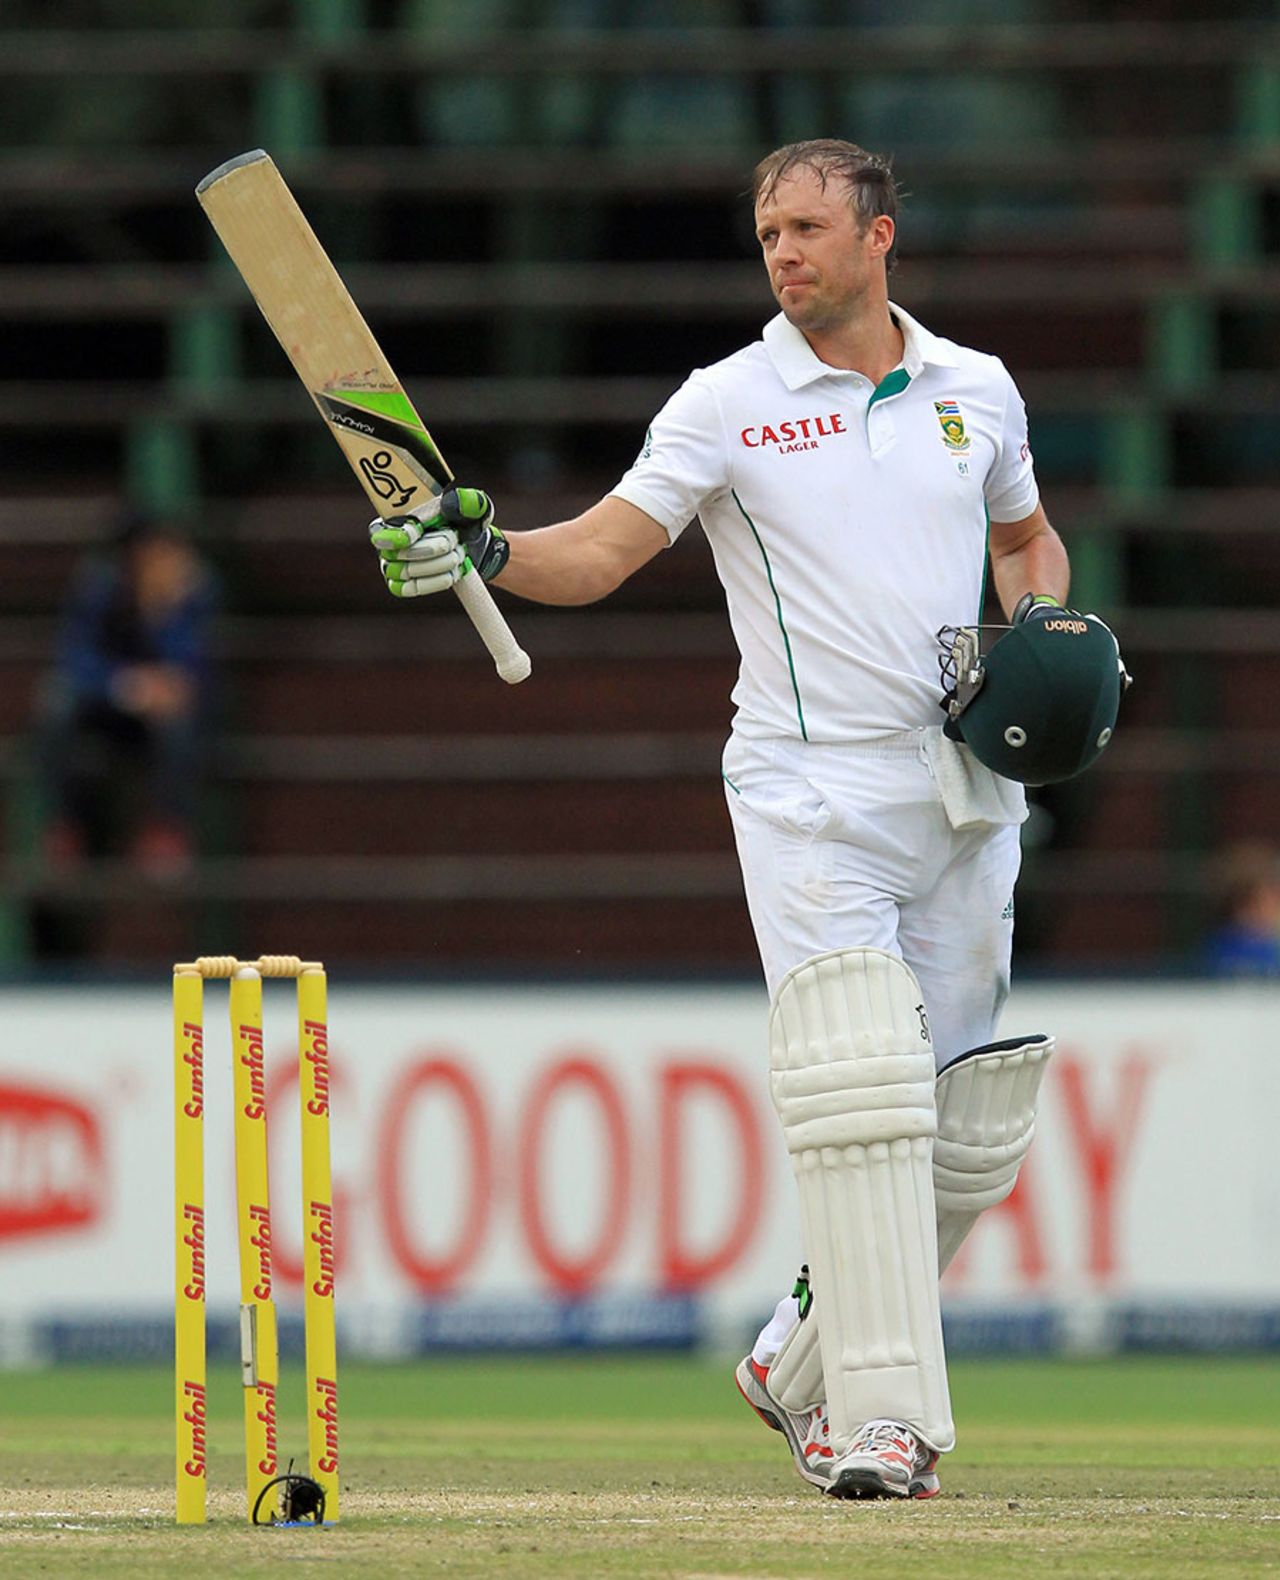 AB de Villiers celebrates his century, South Africa v India, 1st Test, Johannesburg, 5th day, December 22, 2013